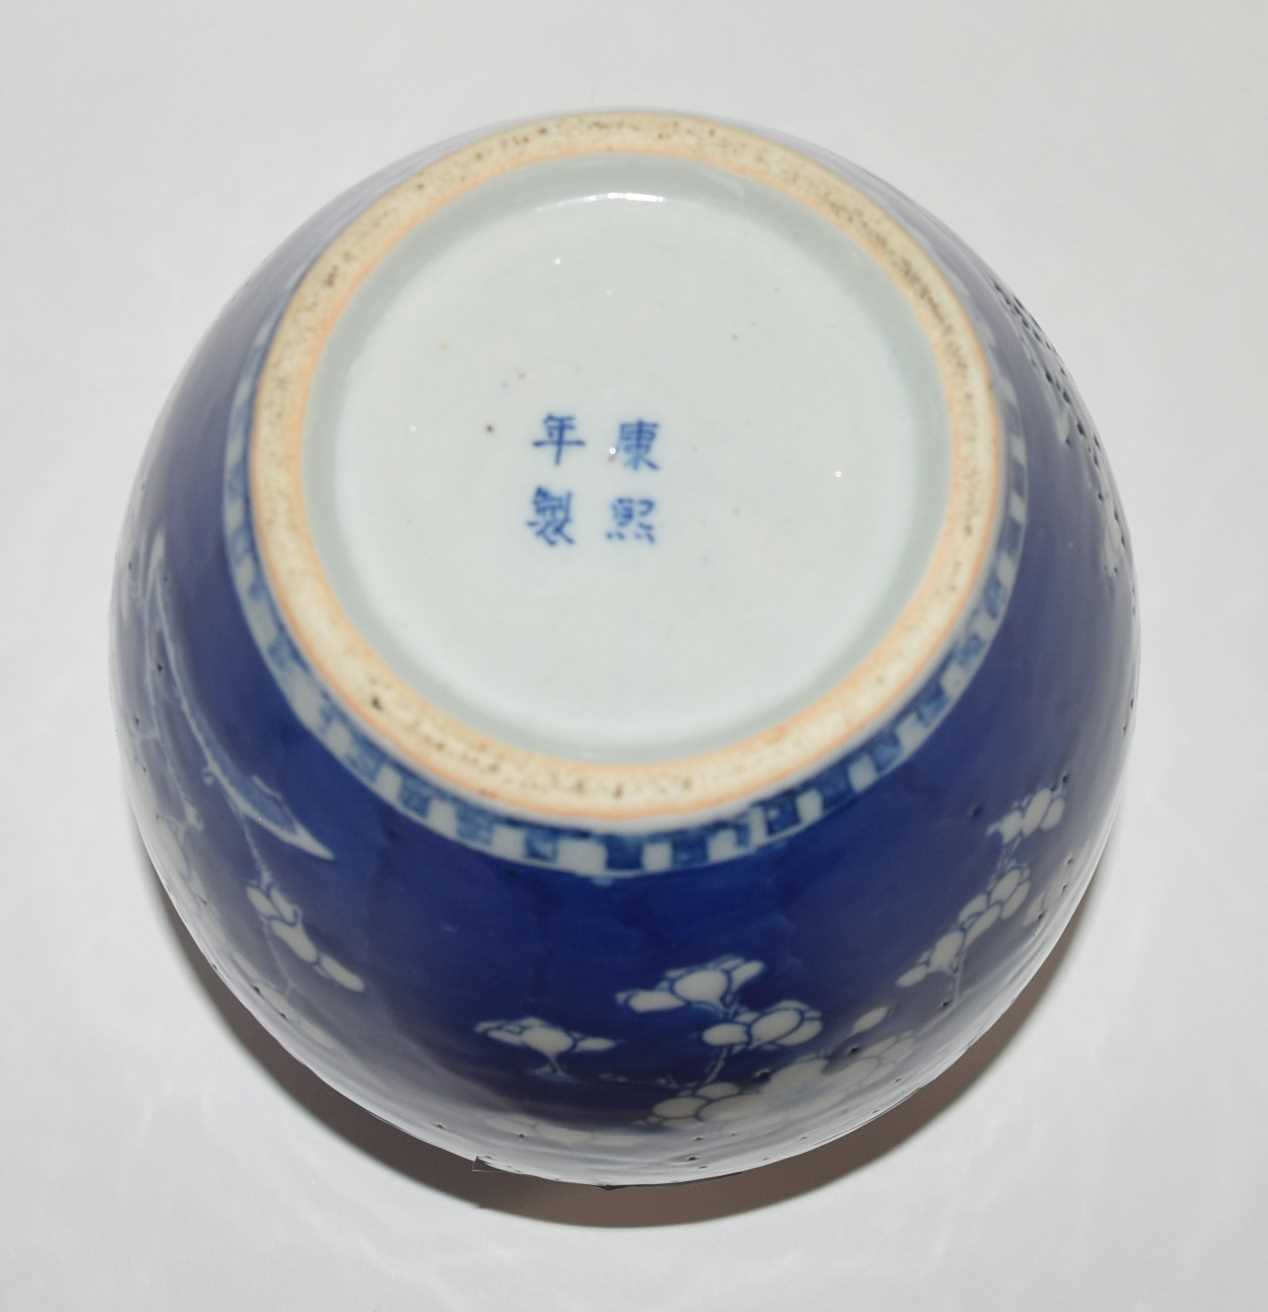 Chinese porcelain ginger jar 19th Century decorated with prunus on a blue ground - Image 3 of 14